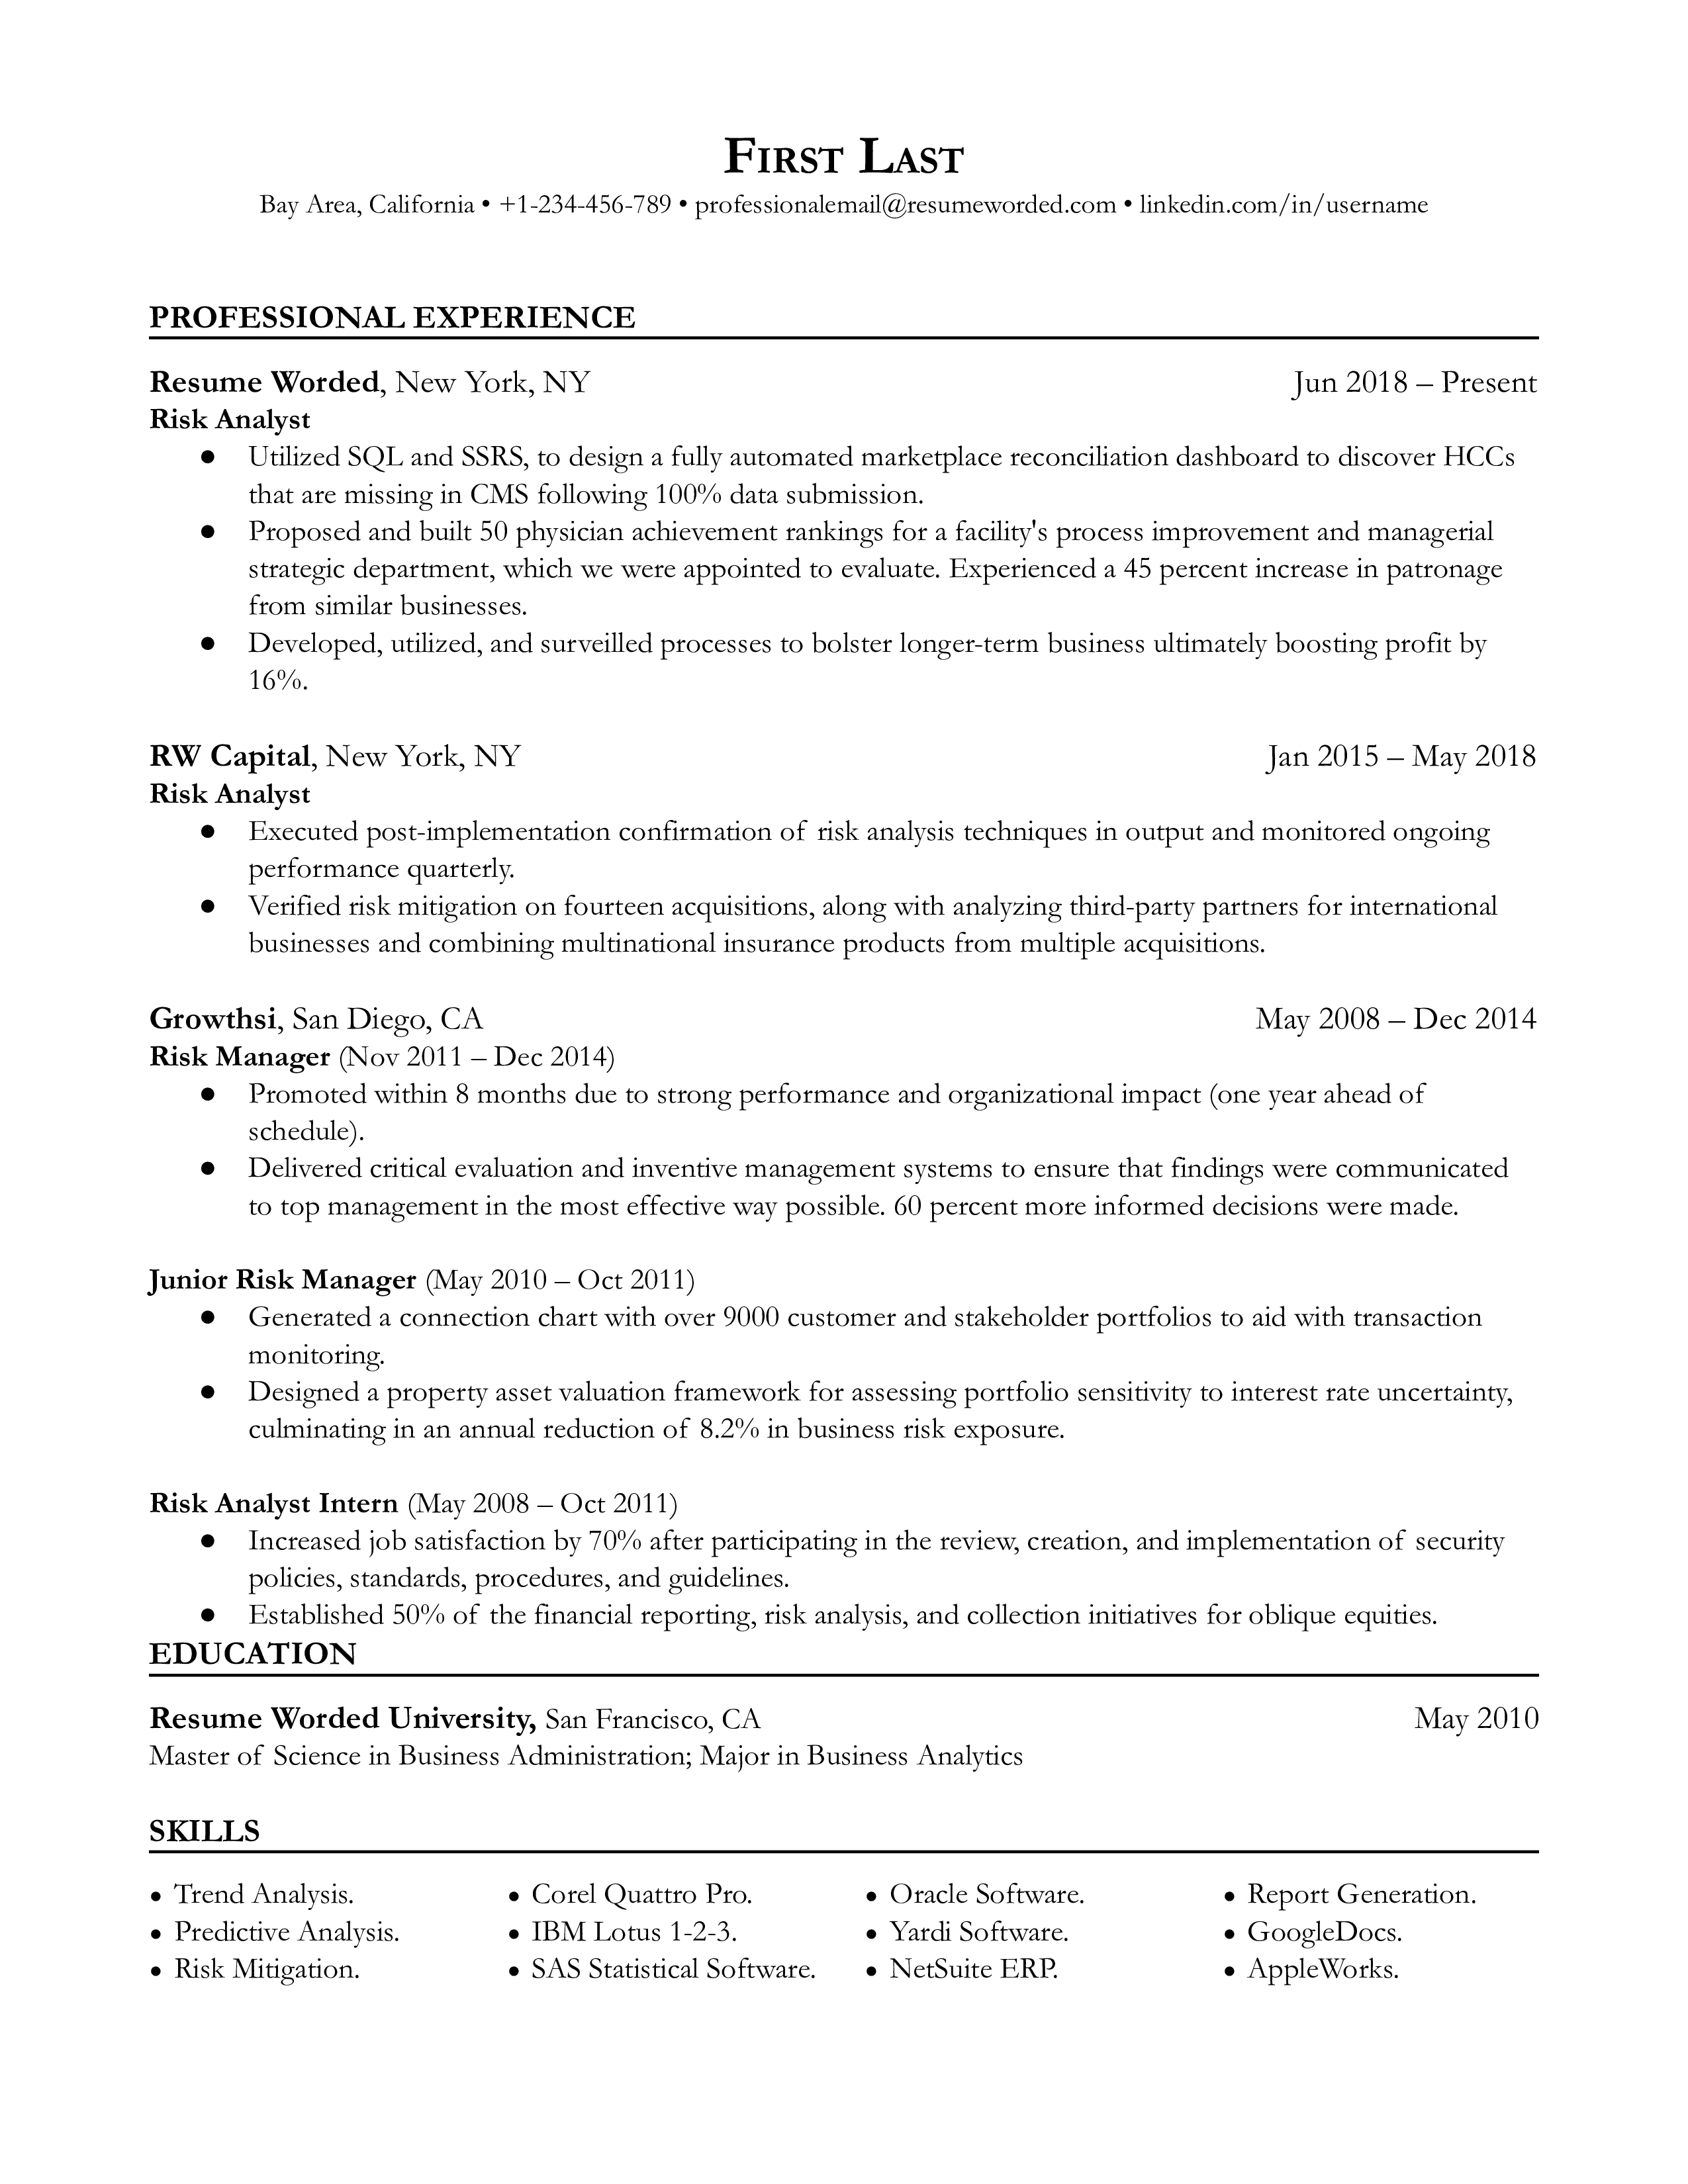 A successful risk analyst resume sample that highlights the applicants technical and analytical skills.